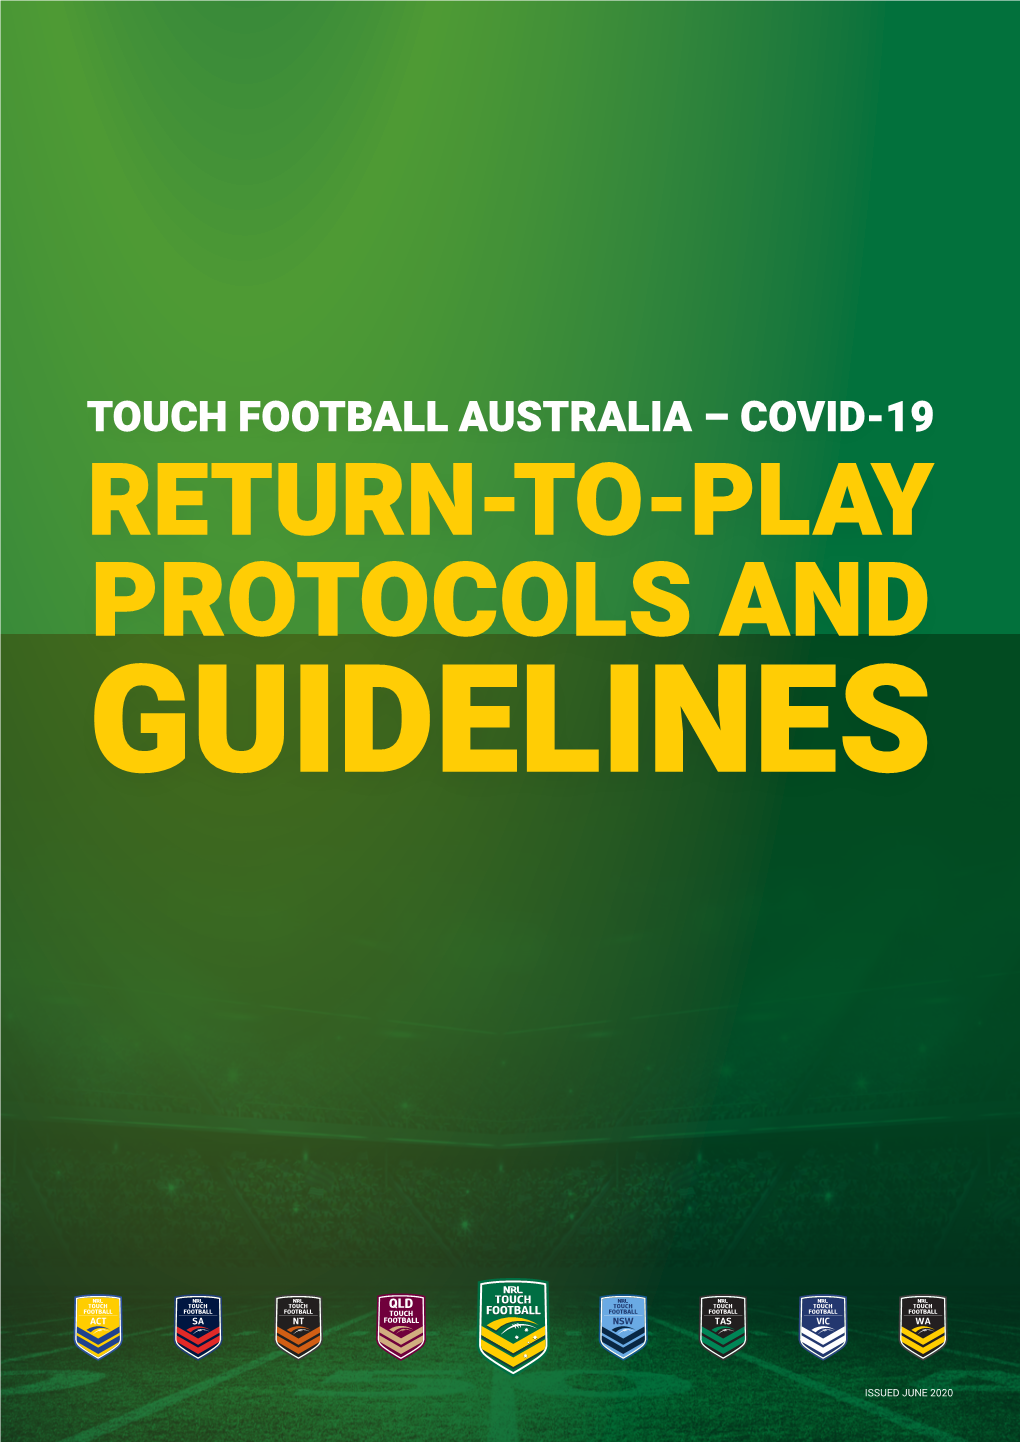 Protocols and Guidelines